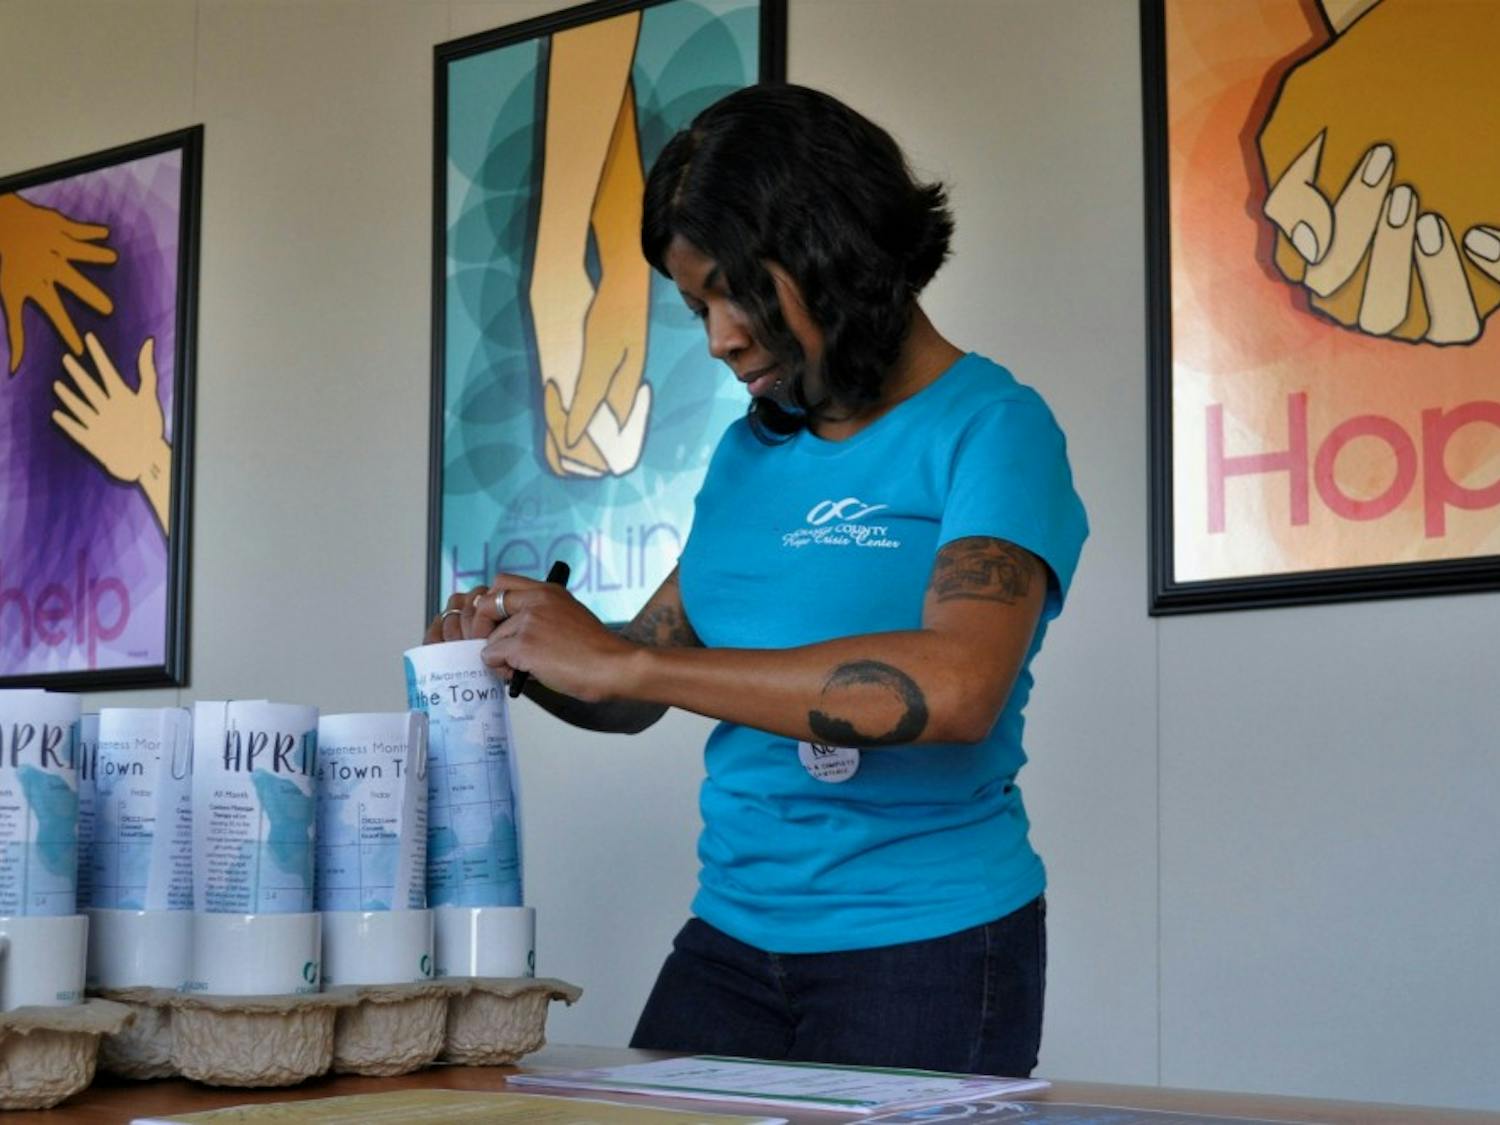 Laing, Orange County Rape Crisis Center's Business and Finance Manager, gets prizes ready for guests at the OCRCC's Housewarming and 45th Birthday Kickoff event on Friday, March 22, 2019. OCRCC's new office is located at 1506 E. Franklin St. #200, Chapel Hill, NC 27514.